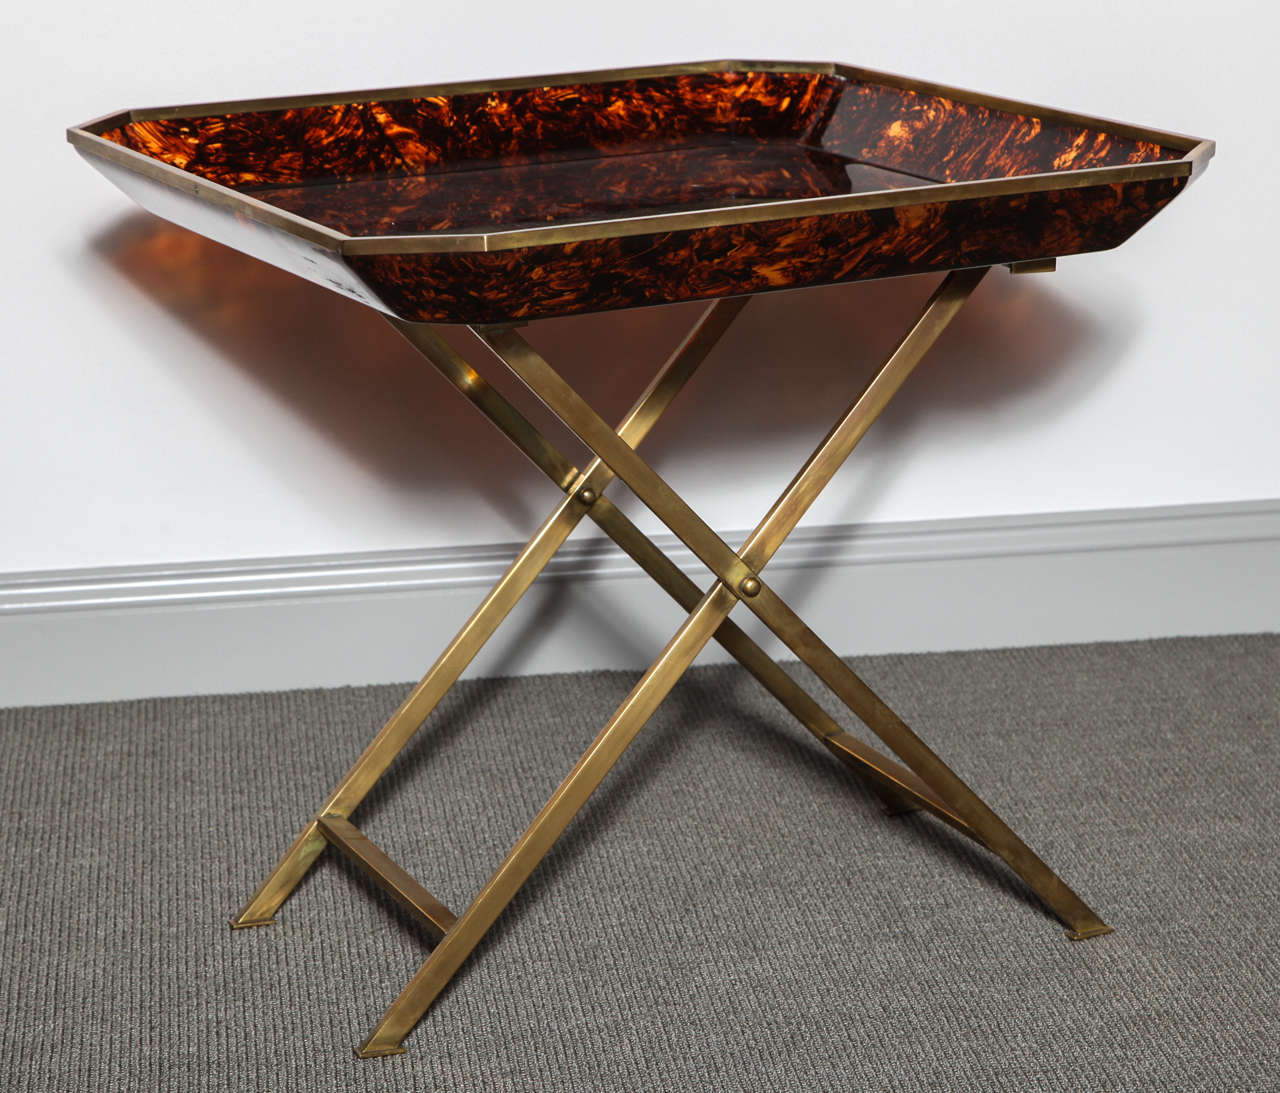 This chic Butler's tray table consists of an octagonal faux tortoiseshell acrylic tray with a brass edge and a delicate X-brass base.